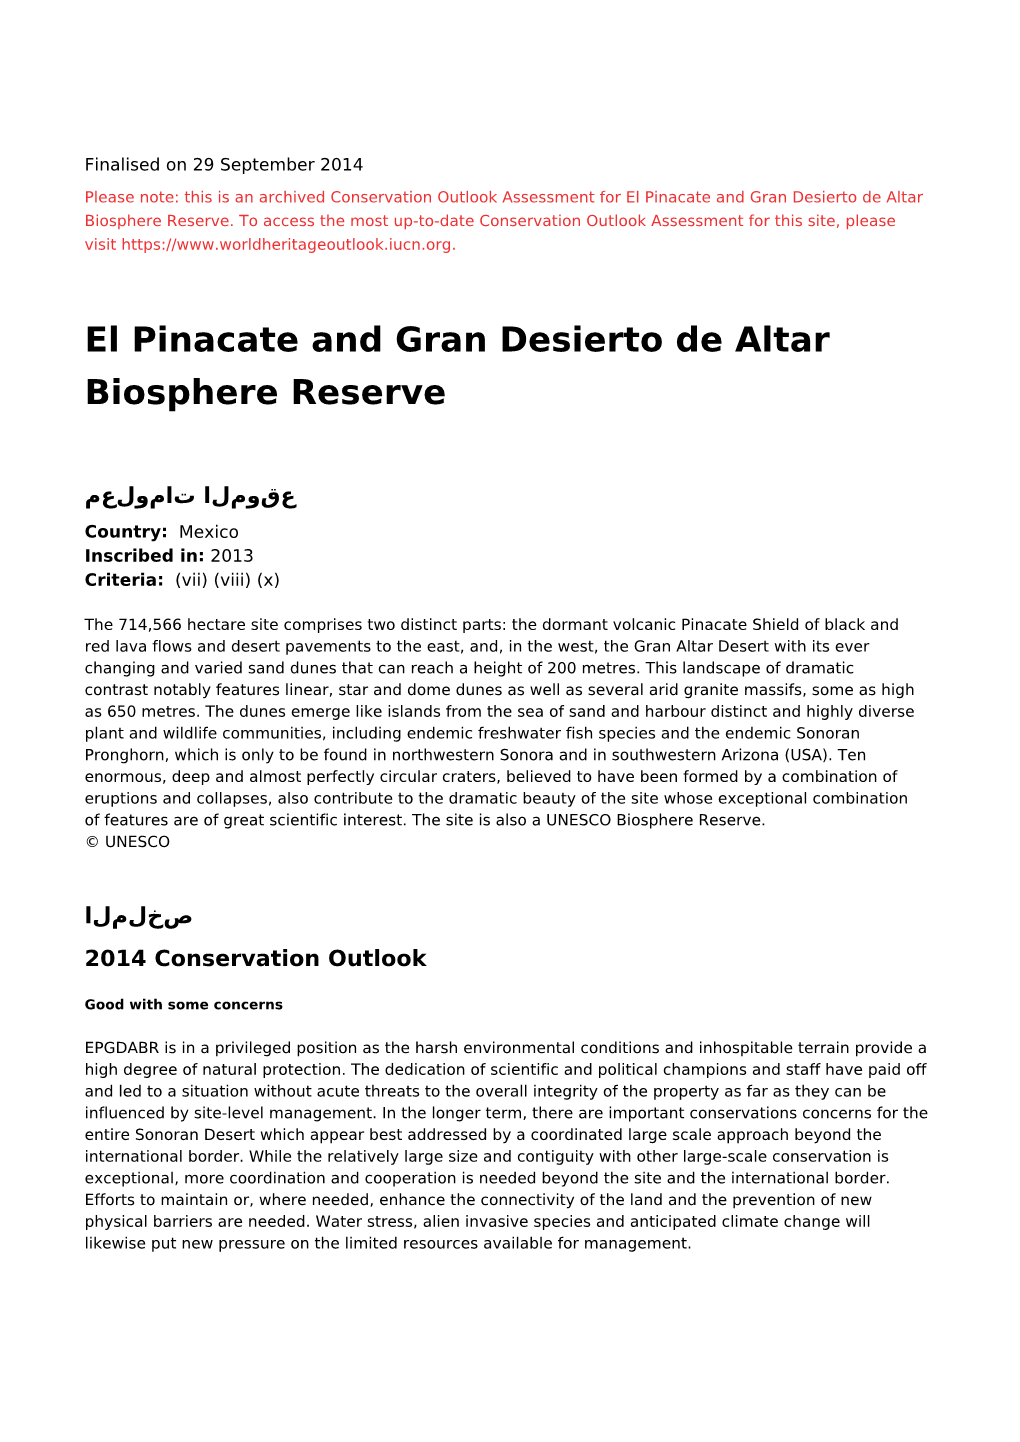 El Pinacate and Gran Desierto De Altar Biosphere Reserve - 2014 Conservation Outlook Assessment (Archived)